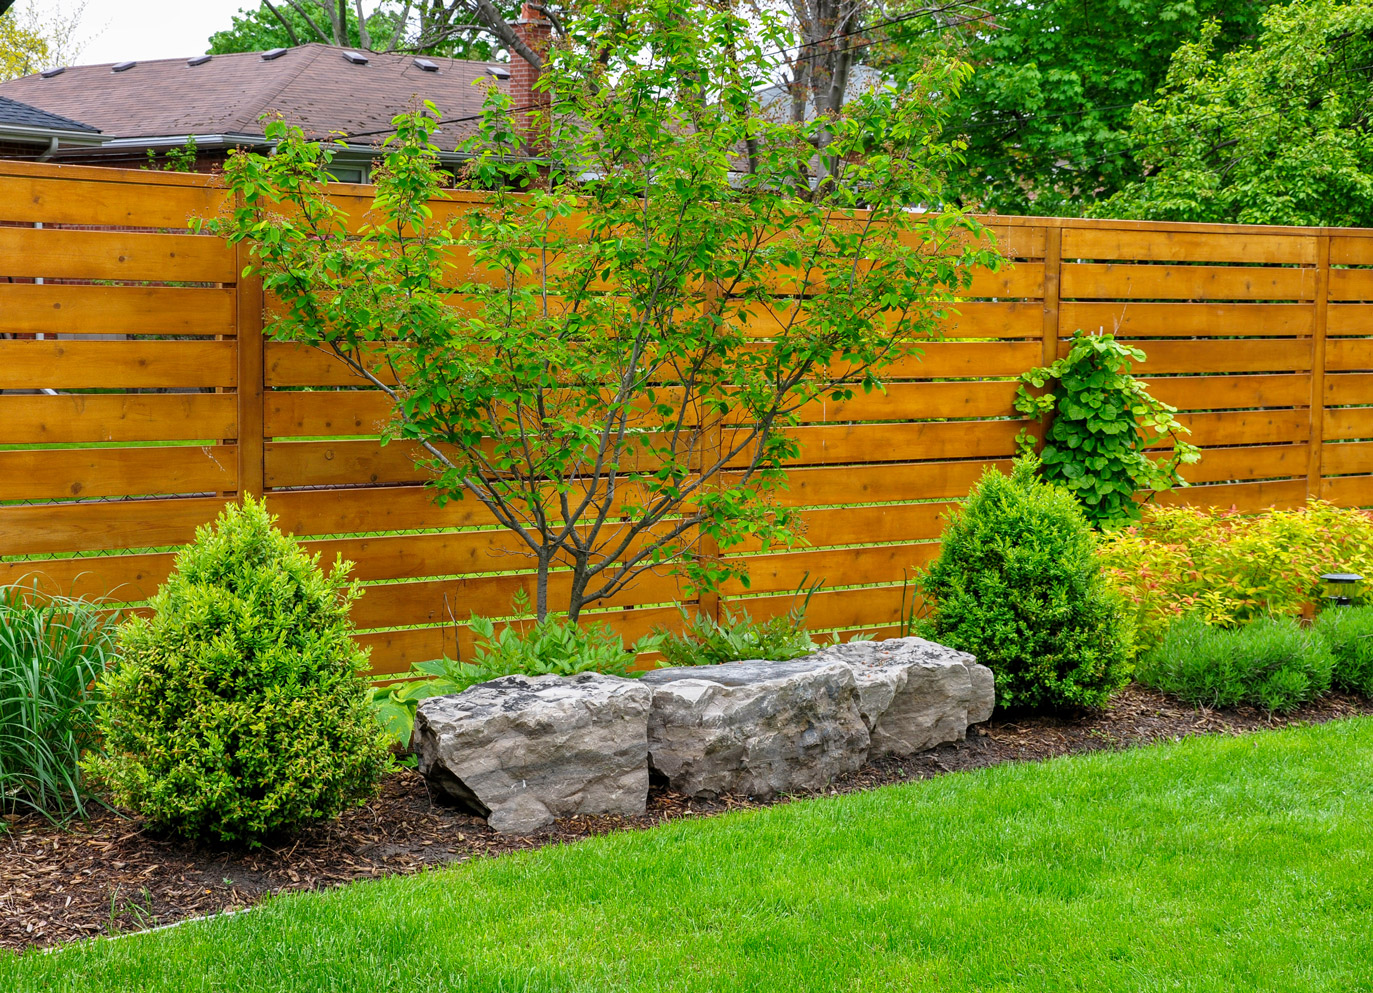 Landscaping and Privacy Considerations